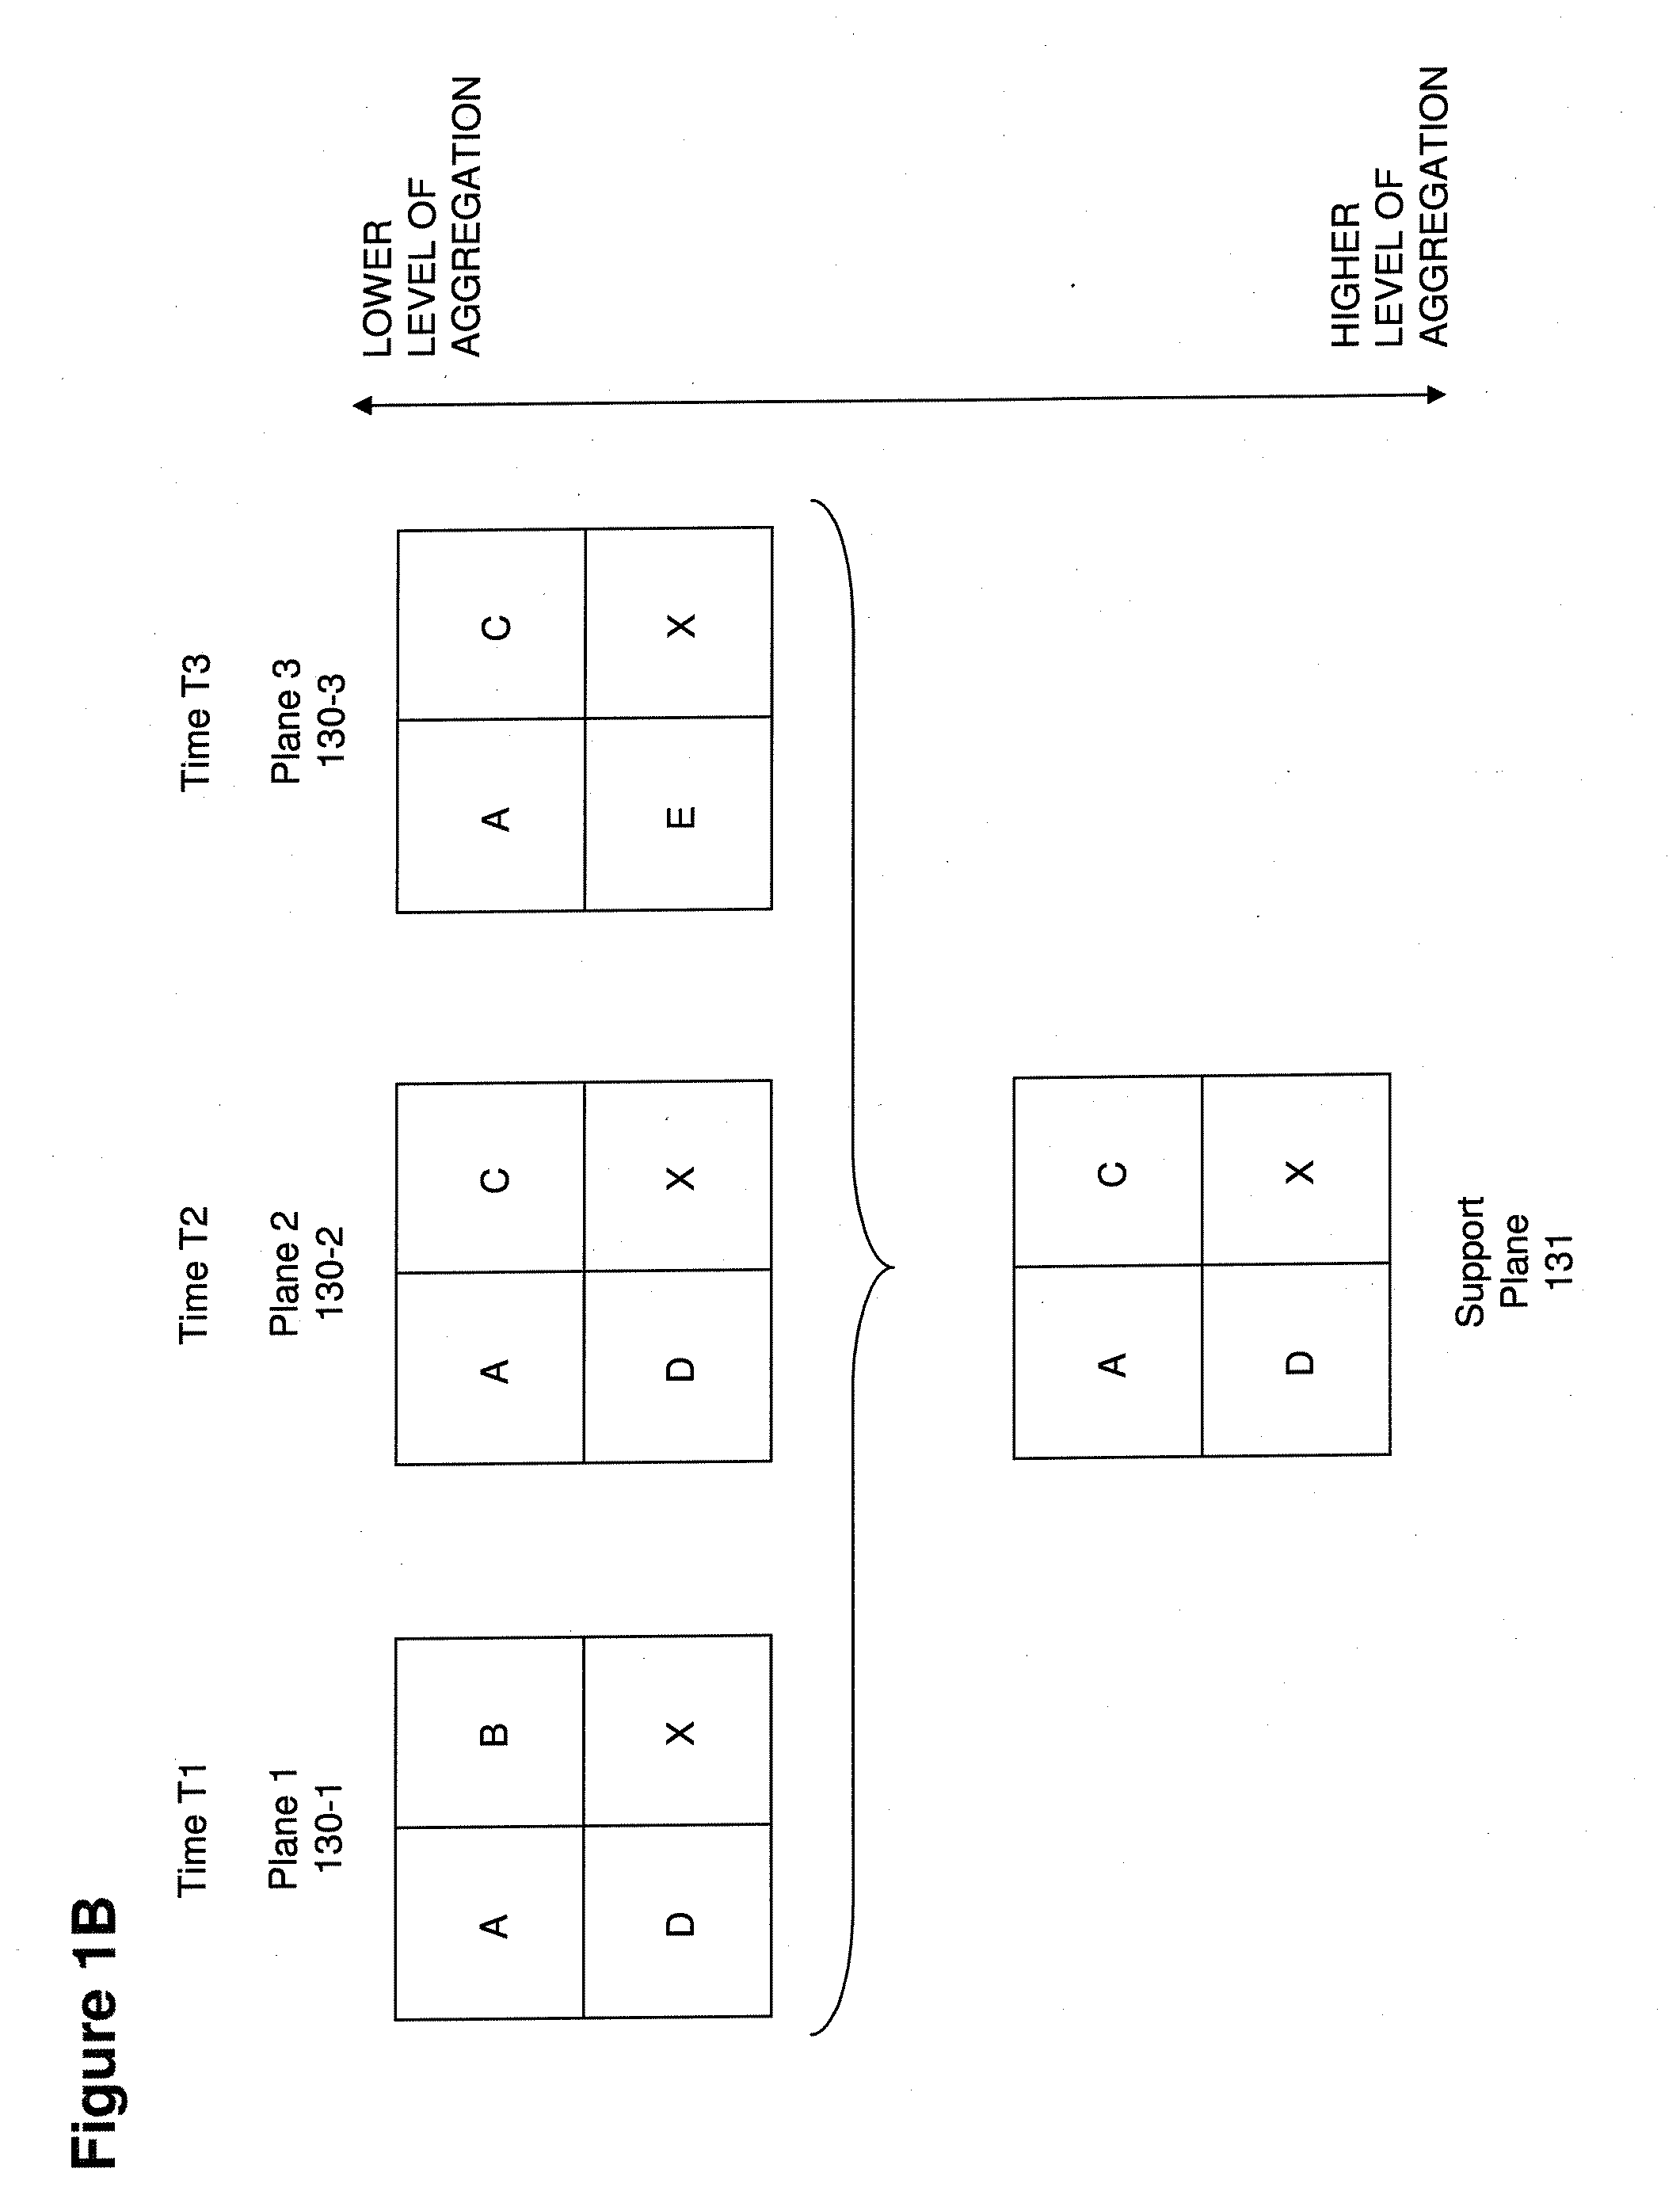 Encoding and decoding based on blending of sequences of samples along time